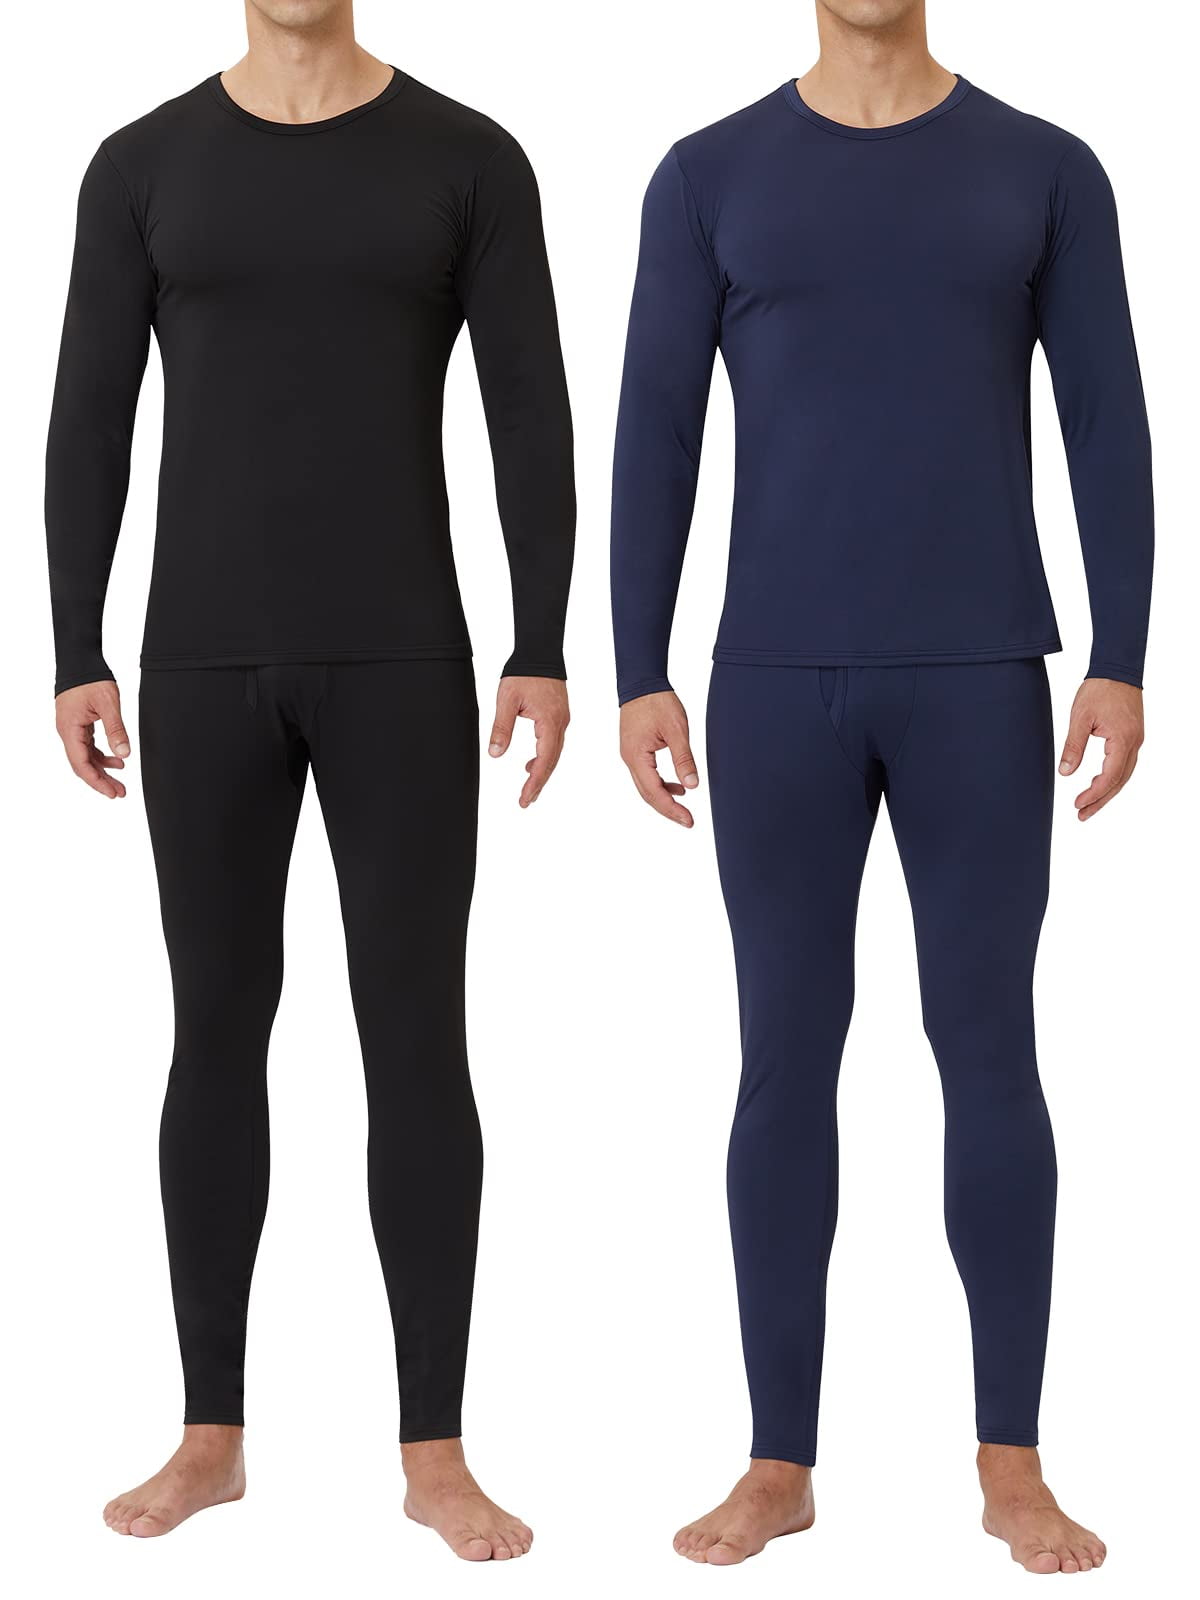 CL convallaria Men's Thermal Underwear Long Johns - 2 Pack Soft and ...